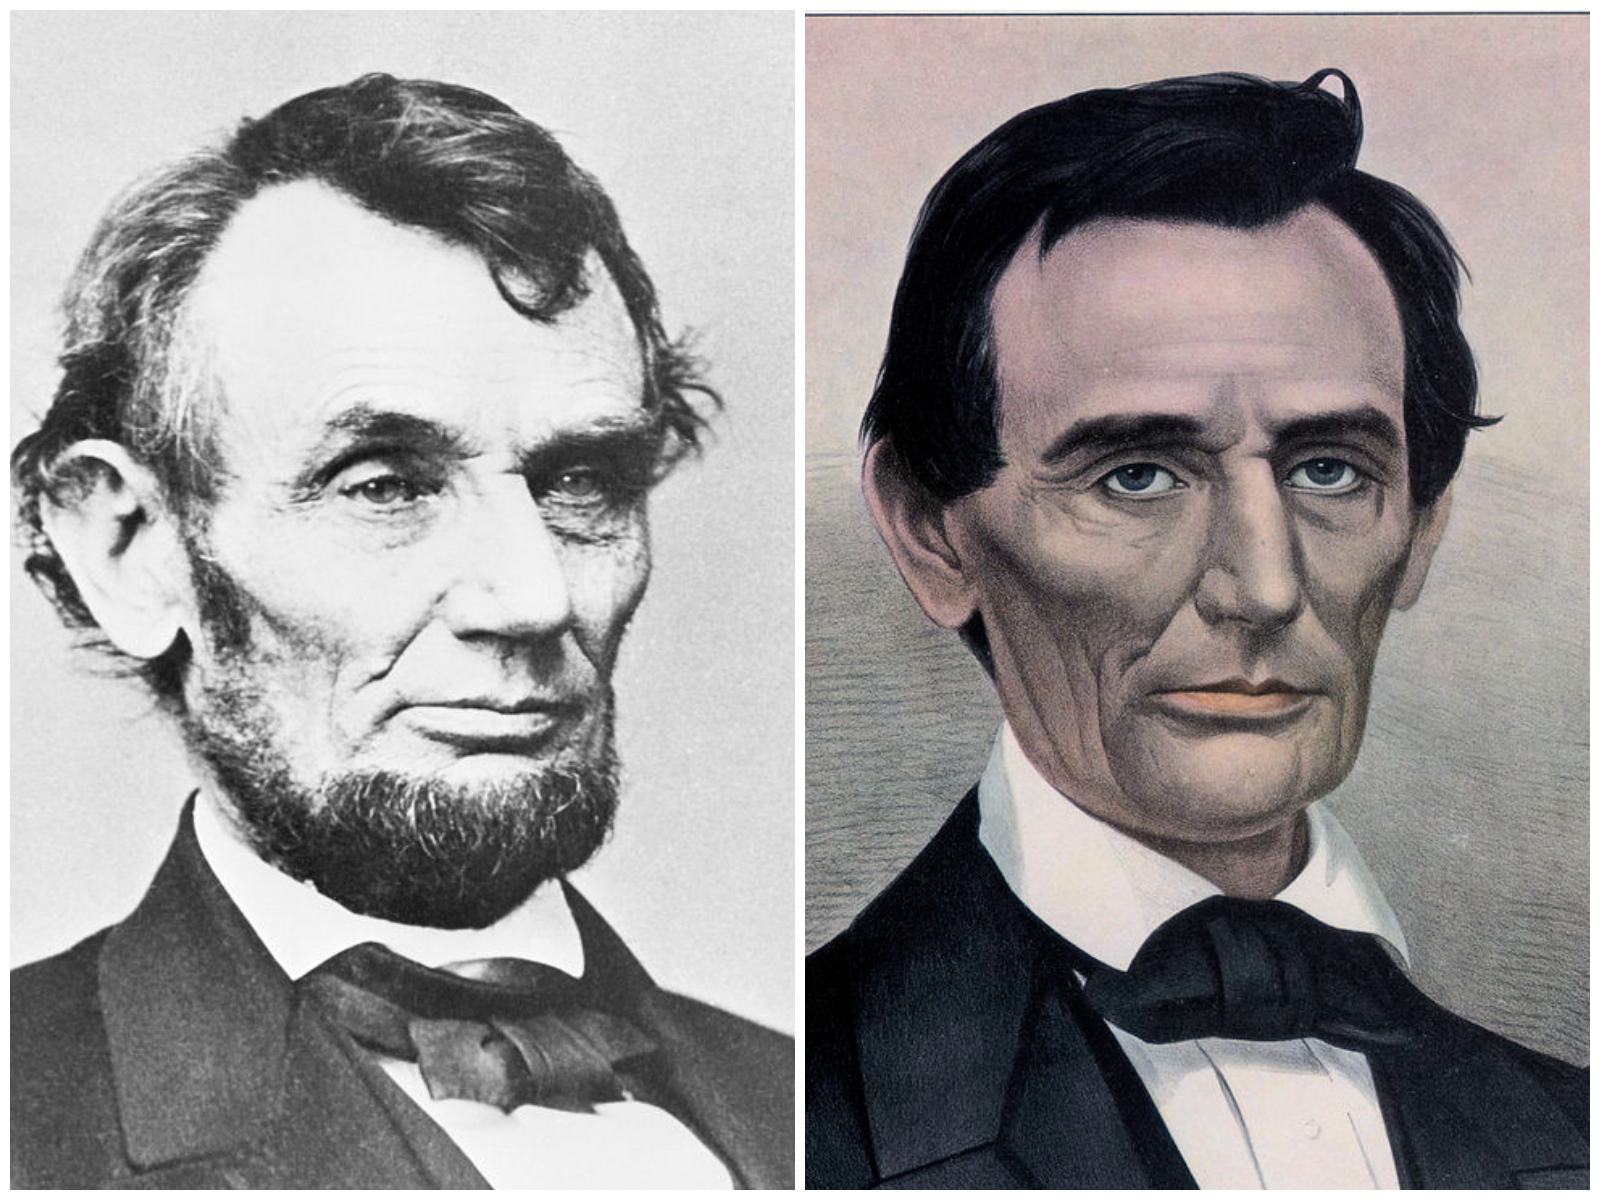 Abraham Lincoln with no beard